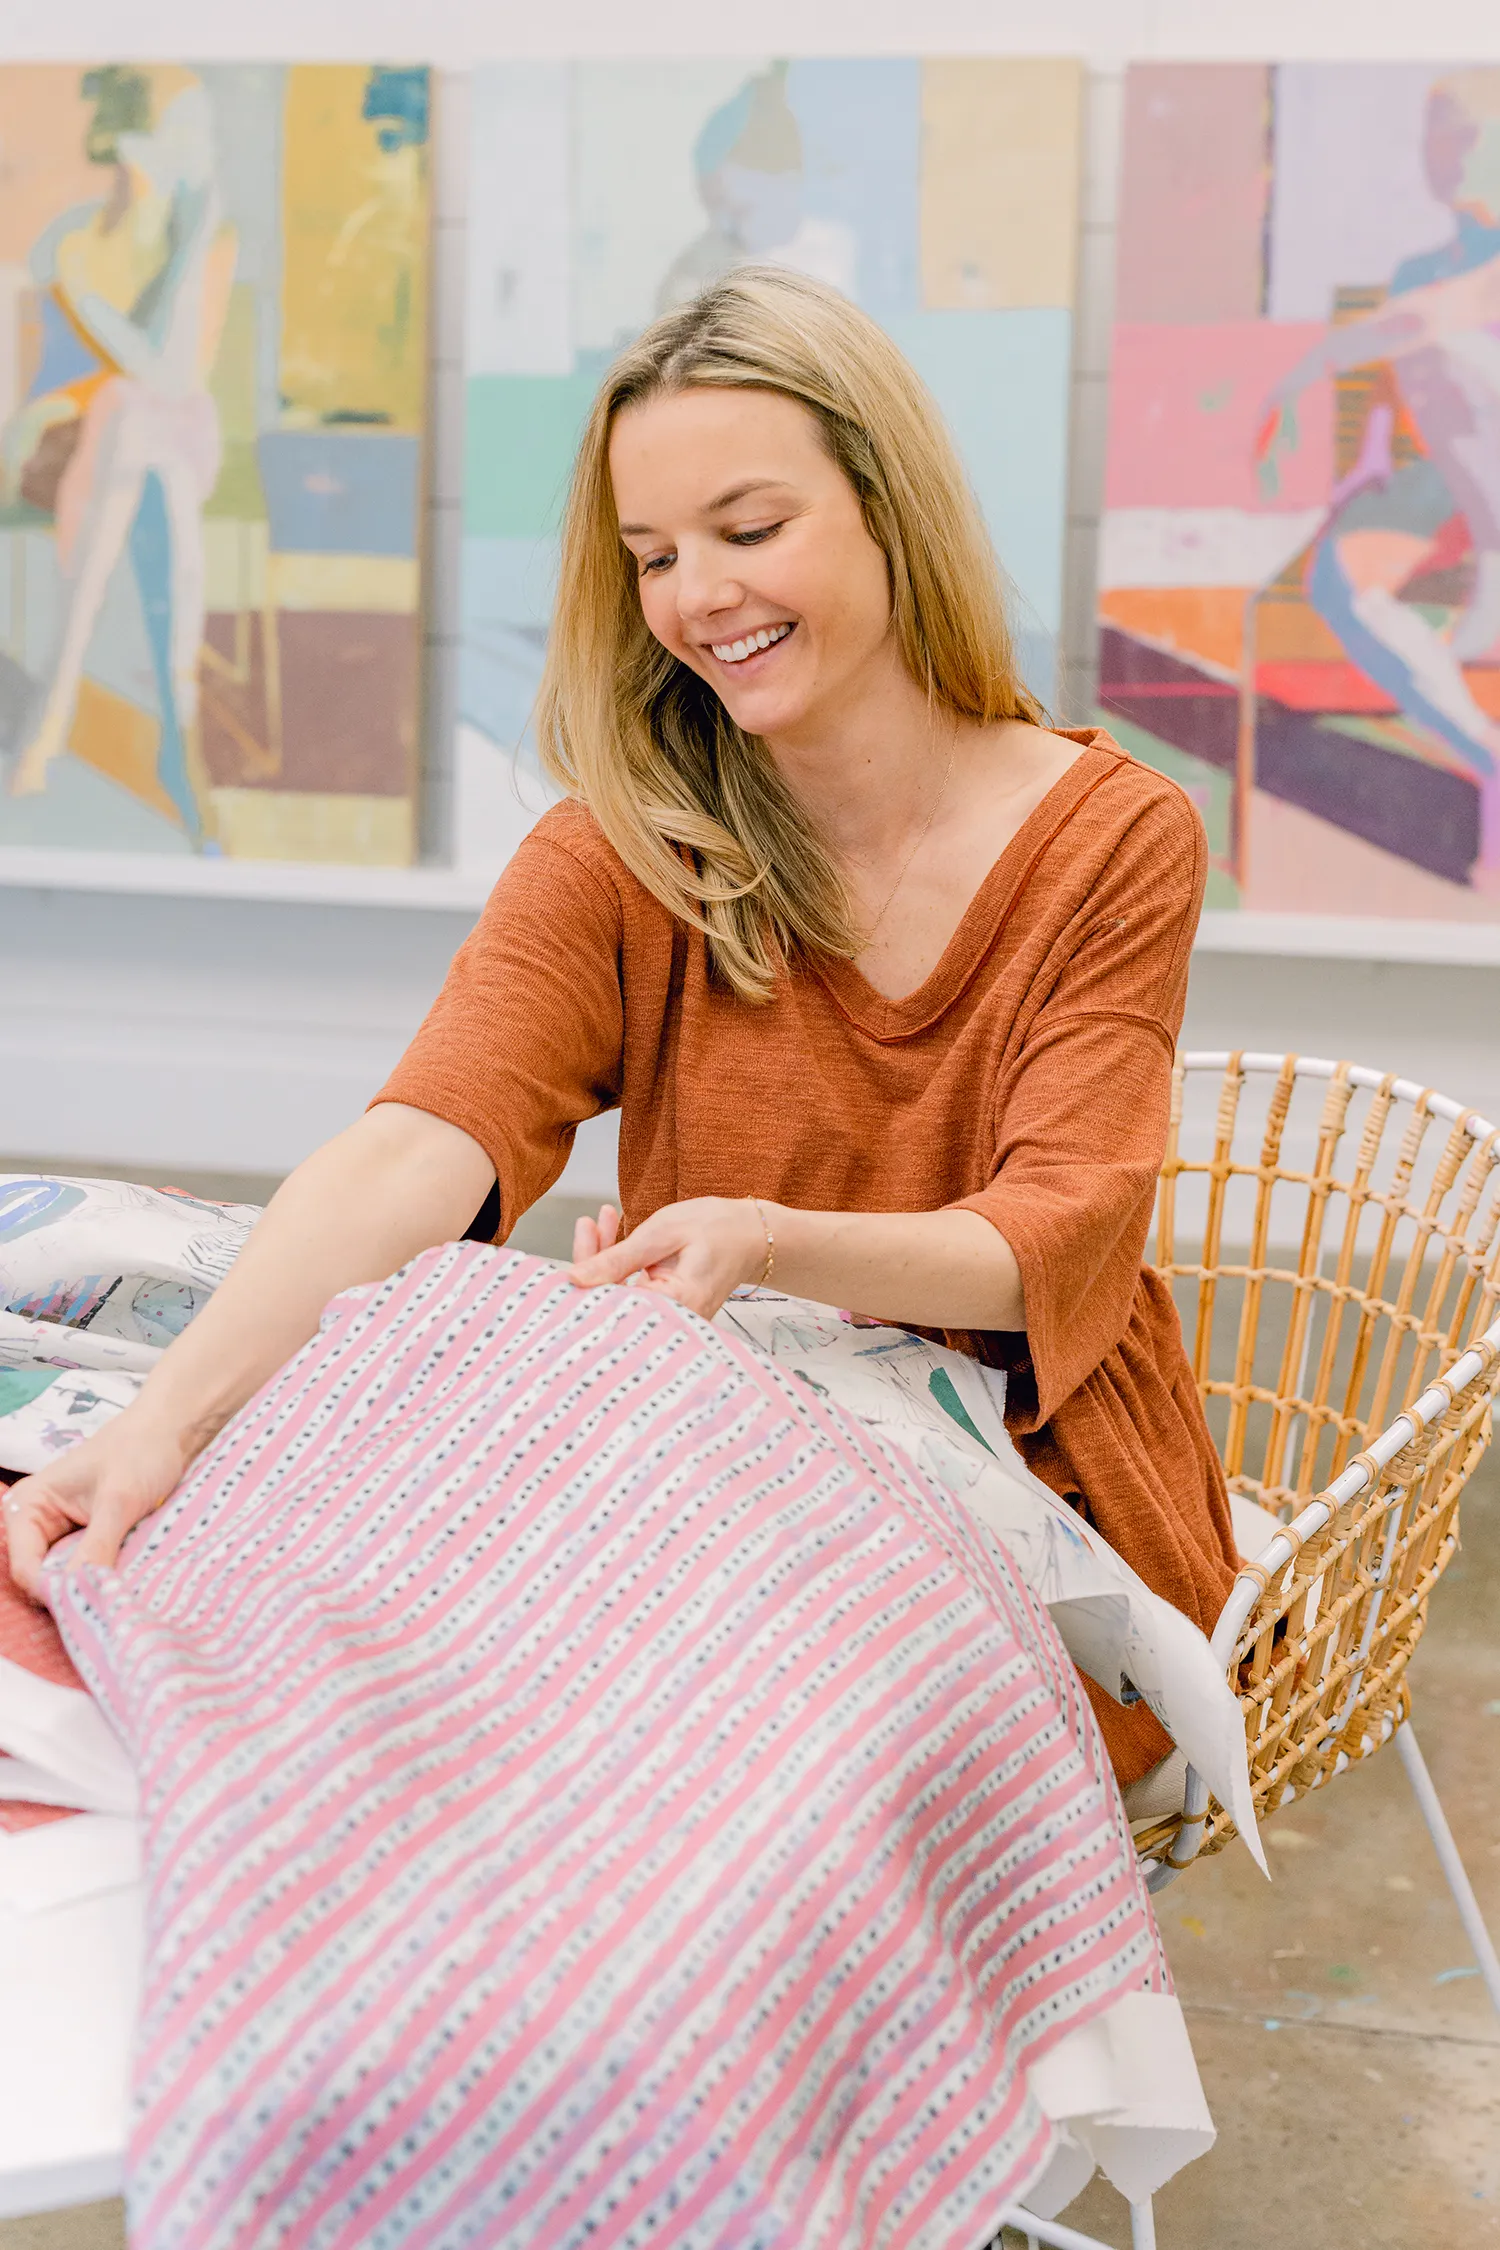 Teil Henly smiling and inspecting patterned textile